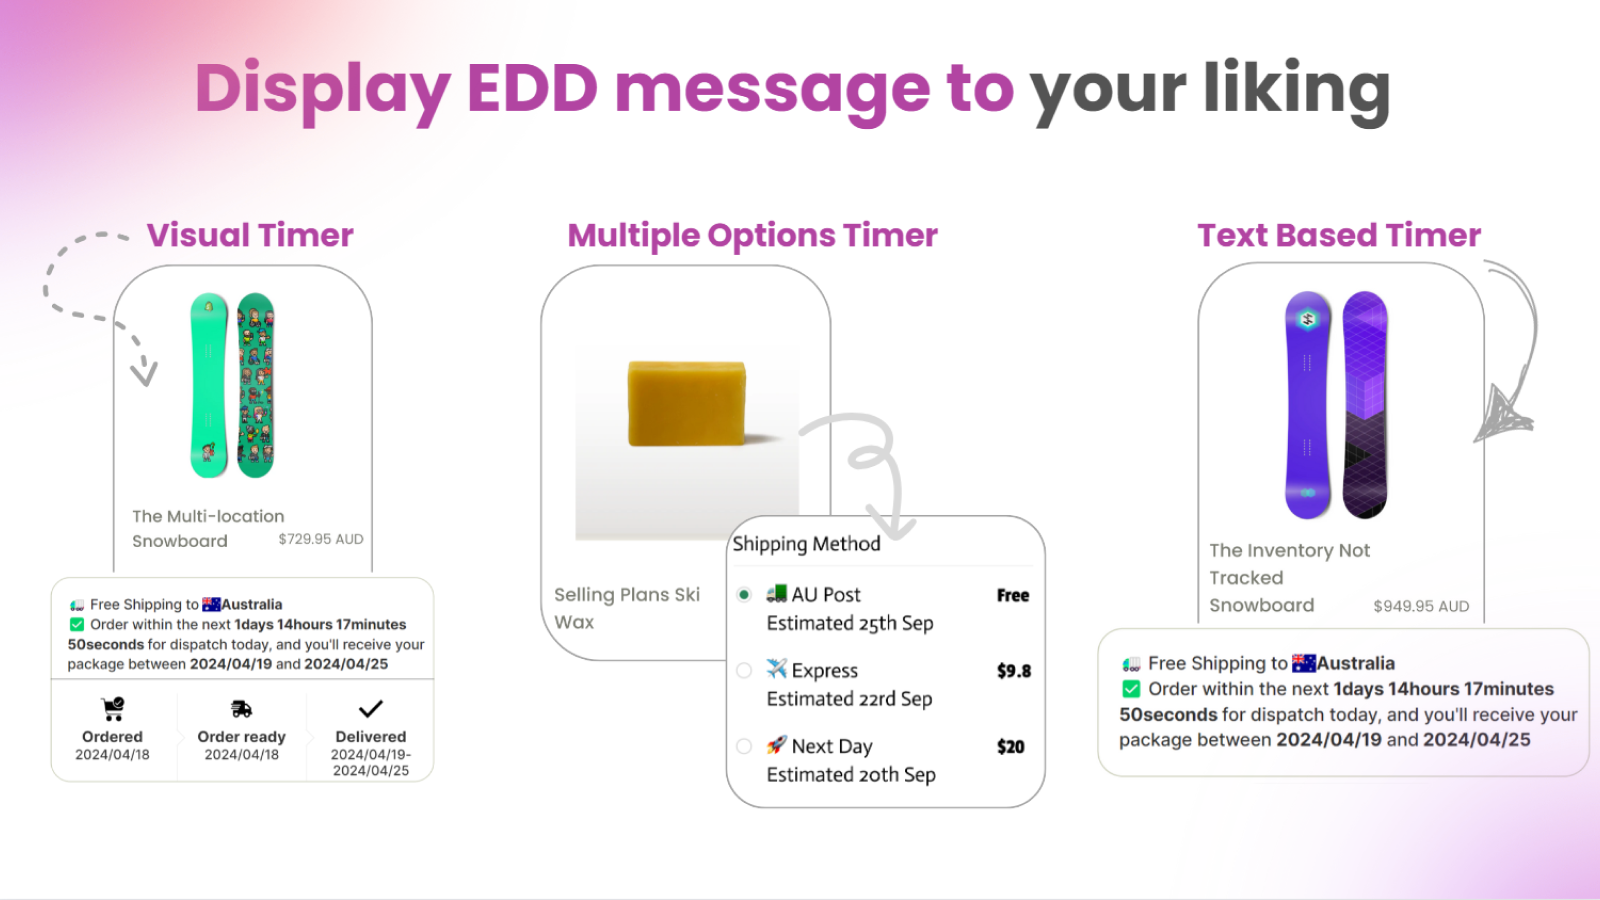 With EDD, proactively show estimated delivery time to customers